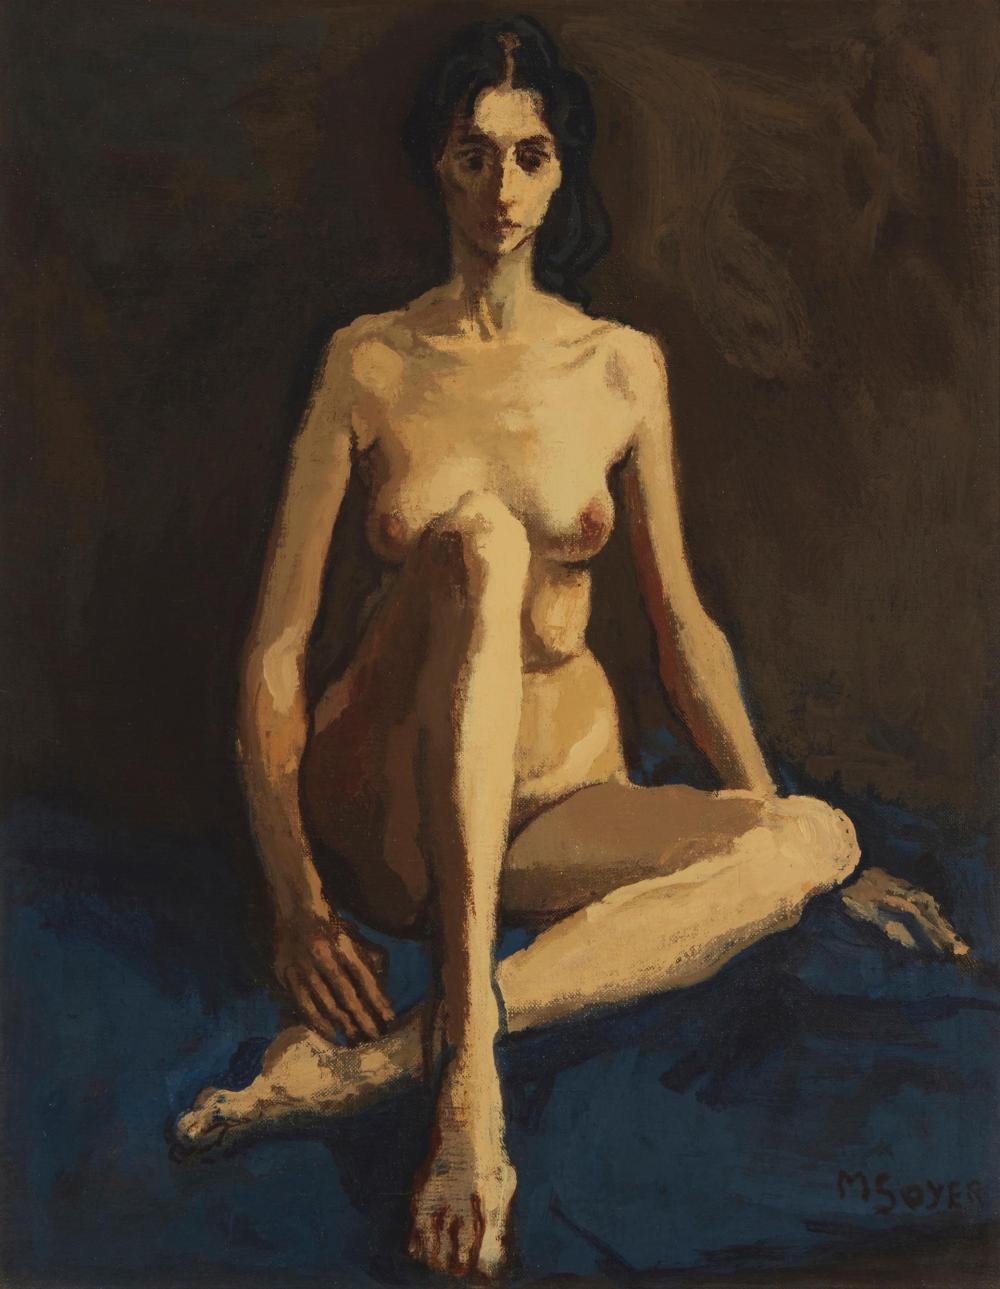 MOSES SOYER, (1899-1974), "SEATED